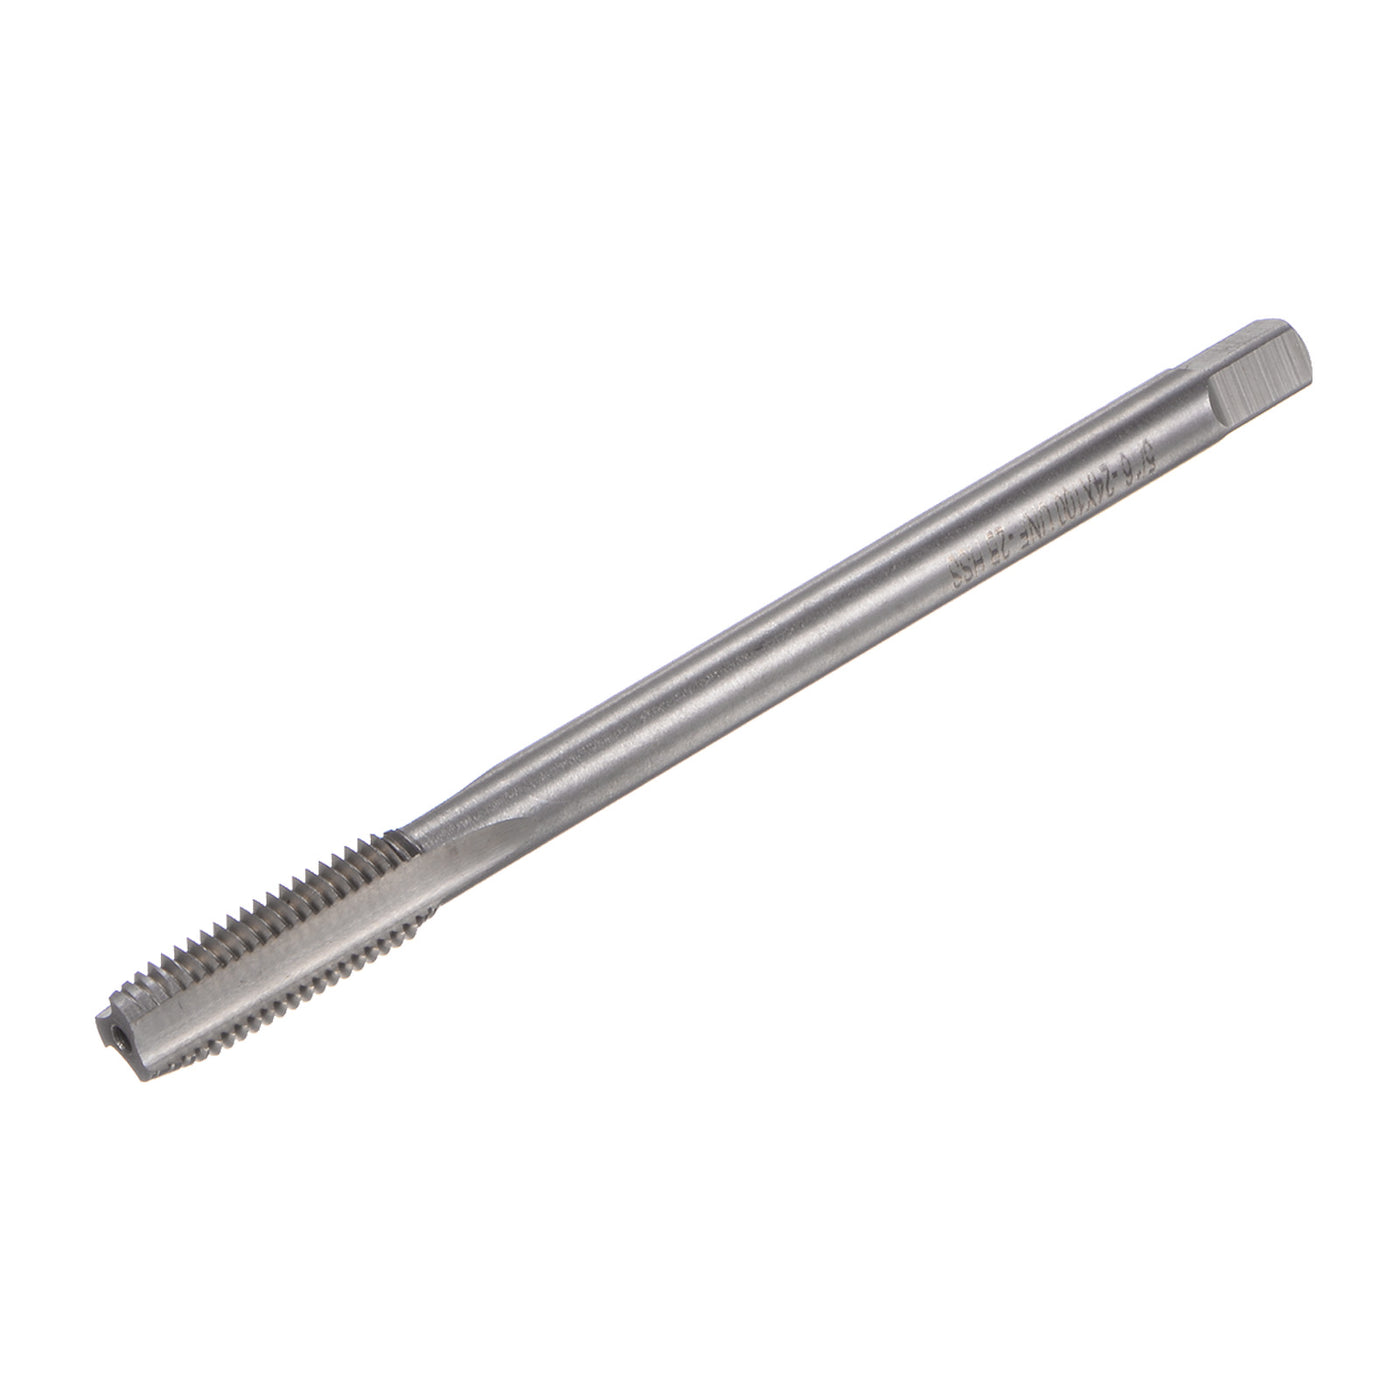 uxcell Uxcell 5/16-24 UNF High Speed Steel 4" Length 3 Straight Flute Machine Screw Thread Tap